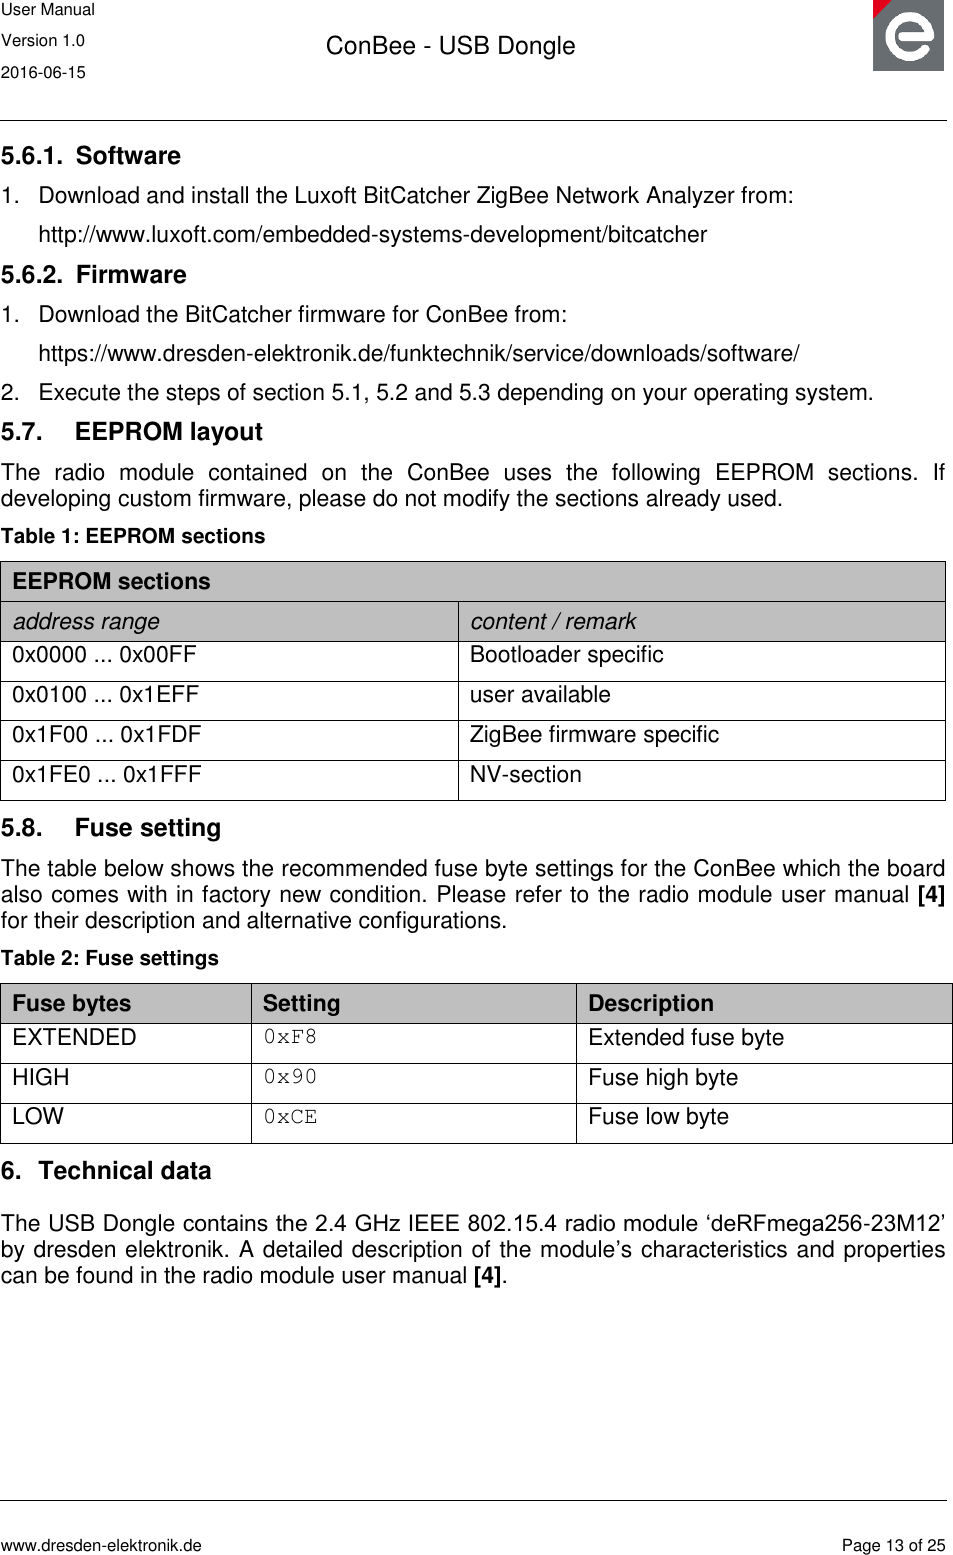 User Manual Version 1.0 2016-06-15  ConBee - USB Dongle      www.dresden-elektronik.de  Page 13 of 25  5.6.1.  Software 1.  Download and install the Luxoft BitCatcher ZigBee Network Analyzer from: http://www.luxoft.com/embedded-systems-development/bitcatcher 5.6.2.  Firmware 1.  Download the BitCatcher firmware for ConBee from: https://www.dresden-elektronik.de/funktechnik/service/downloads/software/ 2.  Execute the steps of section 5.1, 5.2 and 5.3 depending on your operating system. 5.7.  EEPROM layout The  radio  module  contained  on  the  ConBee  uses  the  following  EEPROM  sections.  If developing custom firmware, please do not modify the sections already used. Table 1: EEPROM sections EEPROM sections address range content / remark 0x0000 ... 0x00FF Bootloader specific 0x0100 ... 0x1EFF user available  0x1F00 ... 0x1FDF ZigBee firmware specific 0x1FE0 ... 0x1FFF NV-section 5.8.  Fuse setting The table below shows the recommended fuse byte settings for the ConBee which the board also comes with in factory new condition. Please refer to the radio module user manual [4] for their description and alternative configurations. Table 2: Fuse settings Fuse bytes Setting Description EXTENDED 0xF8 Extended fuse byte HIGH 0x90 Fuse high byte LOW 0xCE Fuse low byte 6.  Technical data The USB Dongle contains the 2.4 GHz IEEE 802.15.4 radio module „deRFmega256-23M12‟ by dresden elektronik. A detailed description of the module‟s characteristics and properties can be found in the radio module user manual [4].   